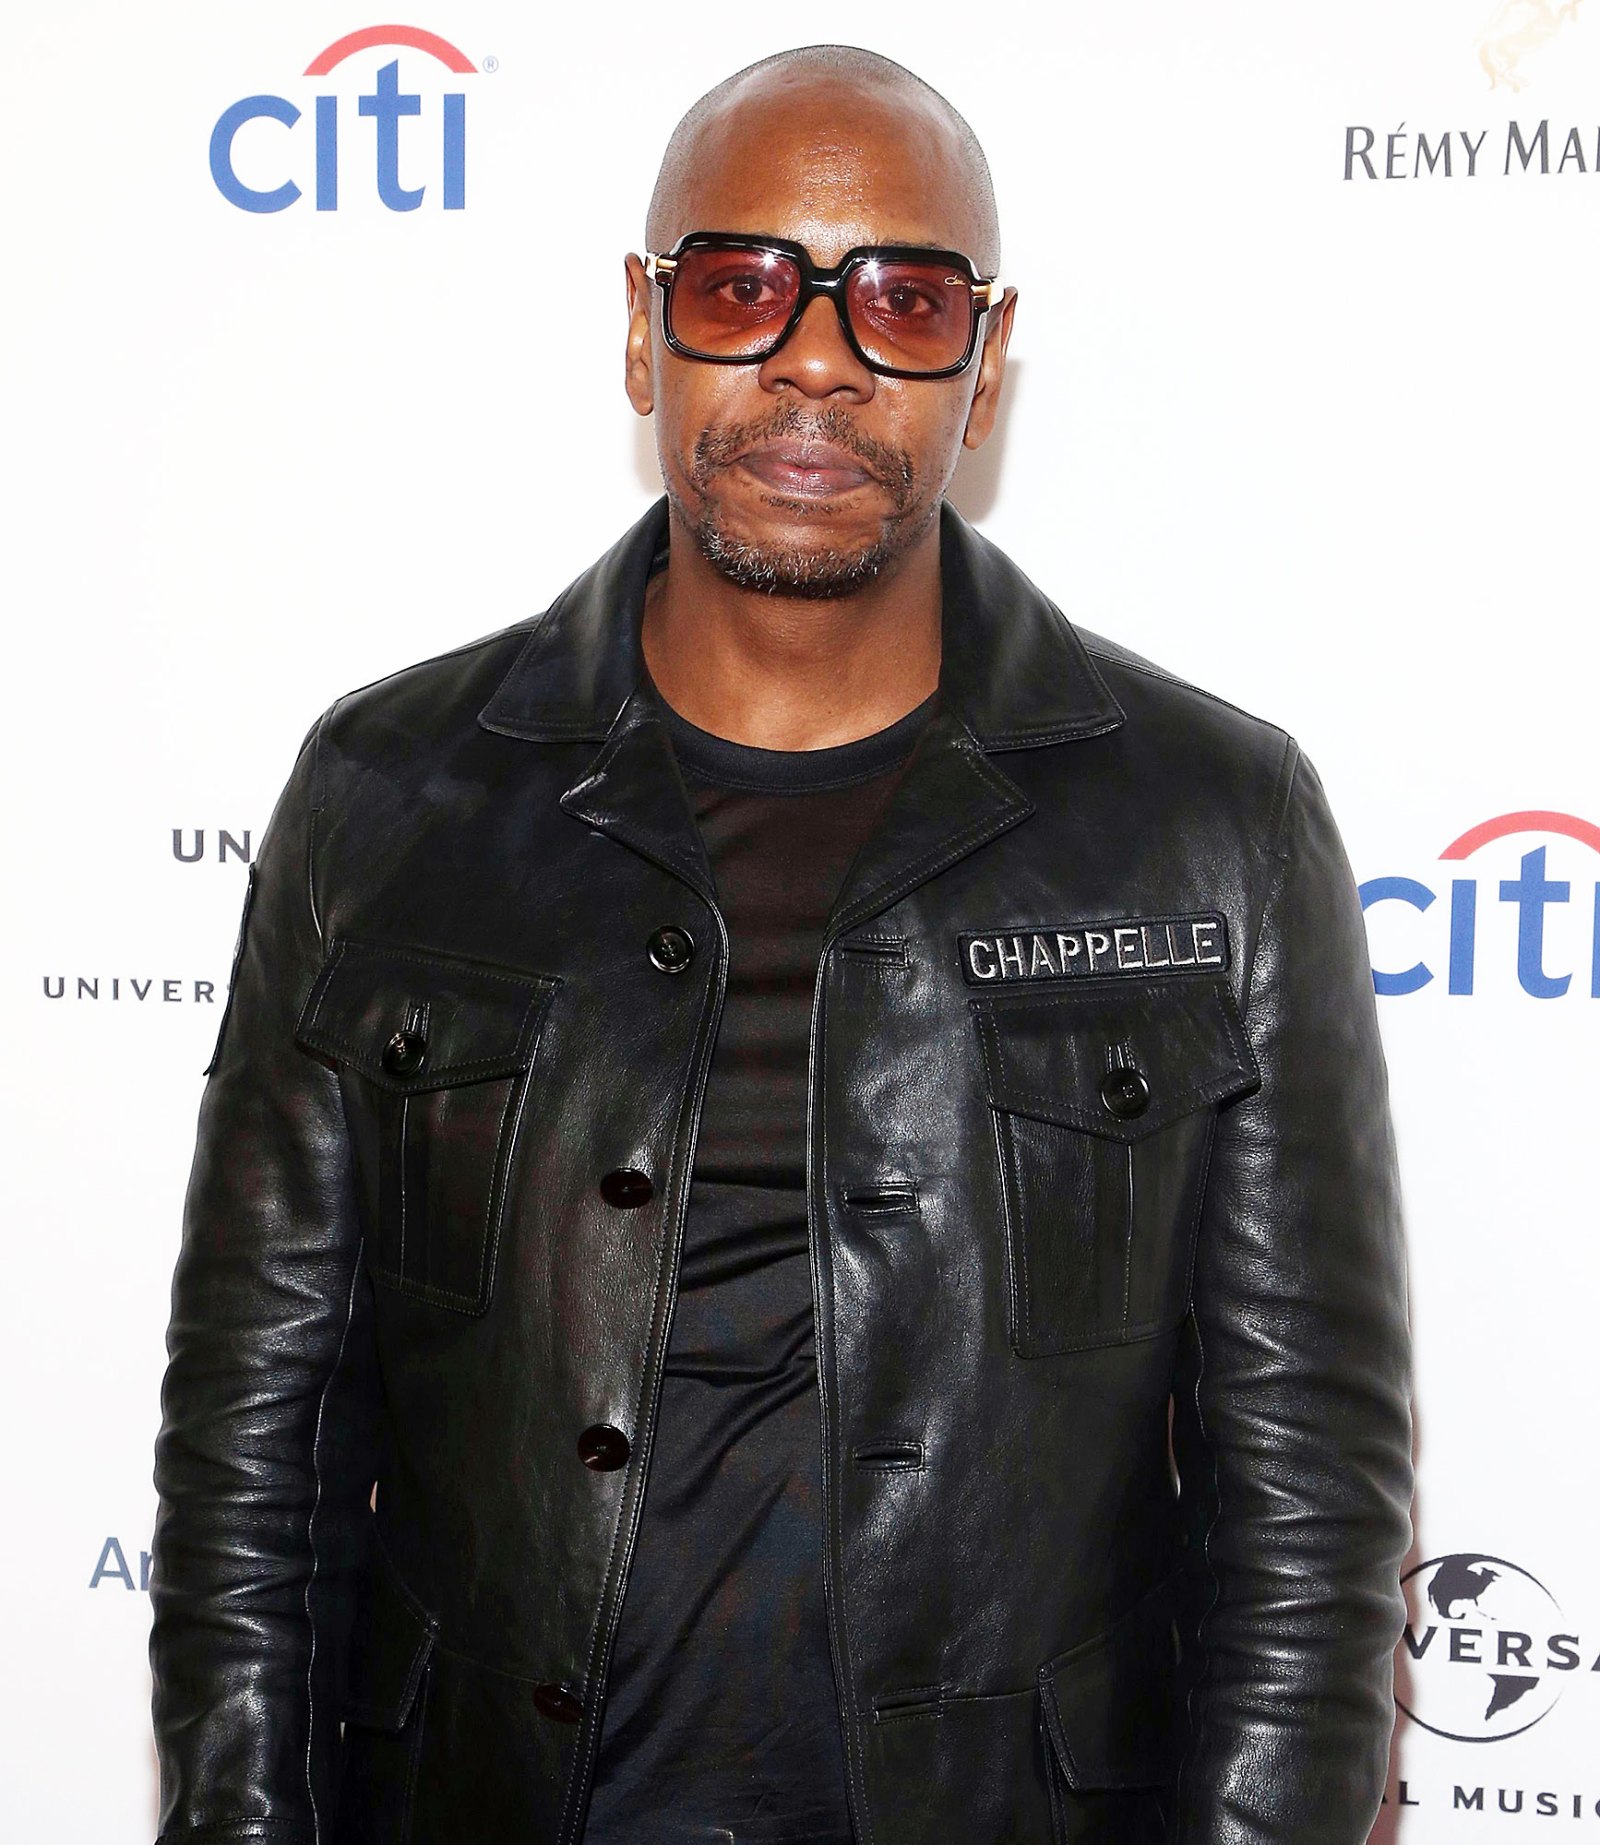 Dave Chapelle Tests Positive for COVID-19 and Cancels Upcoming Stand-Up Shows